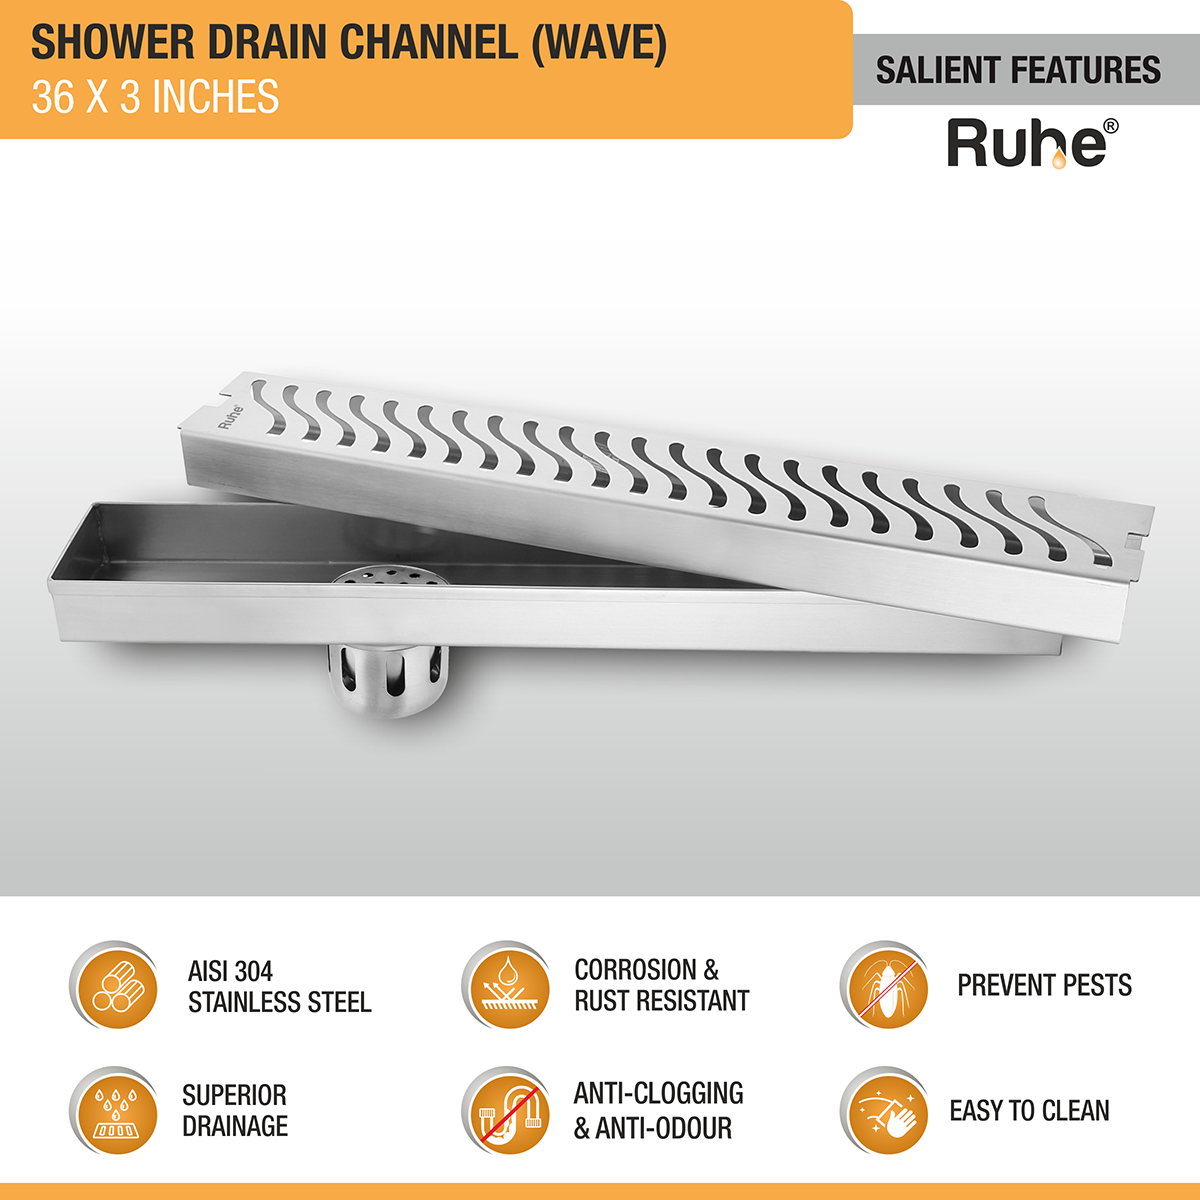 Wave Shower Drain Channel (36 X 3 Inches) with Cockroach Trap (304 Grade) features